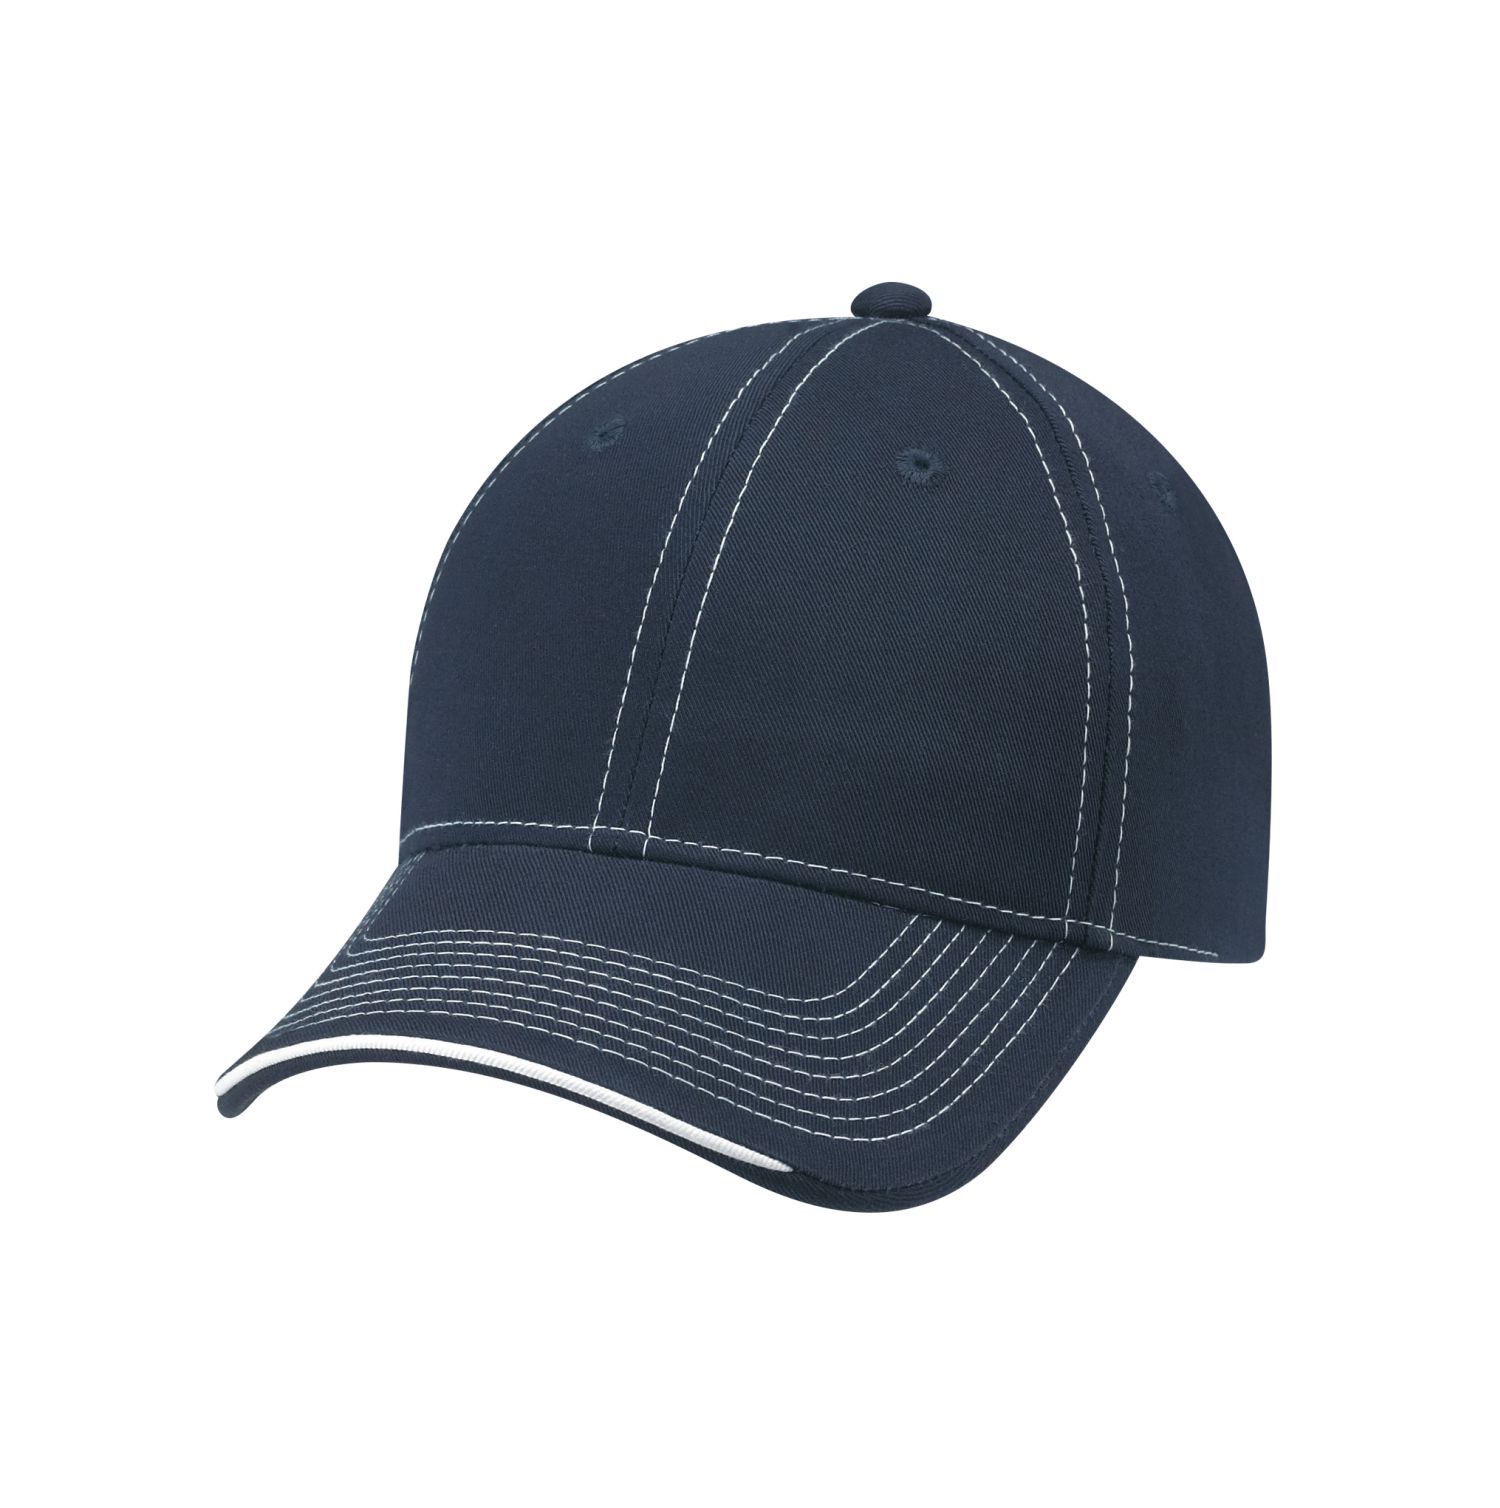 AJM 6-Panel Constructed Full-Fit Hat #6F617M Navy / White